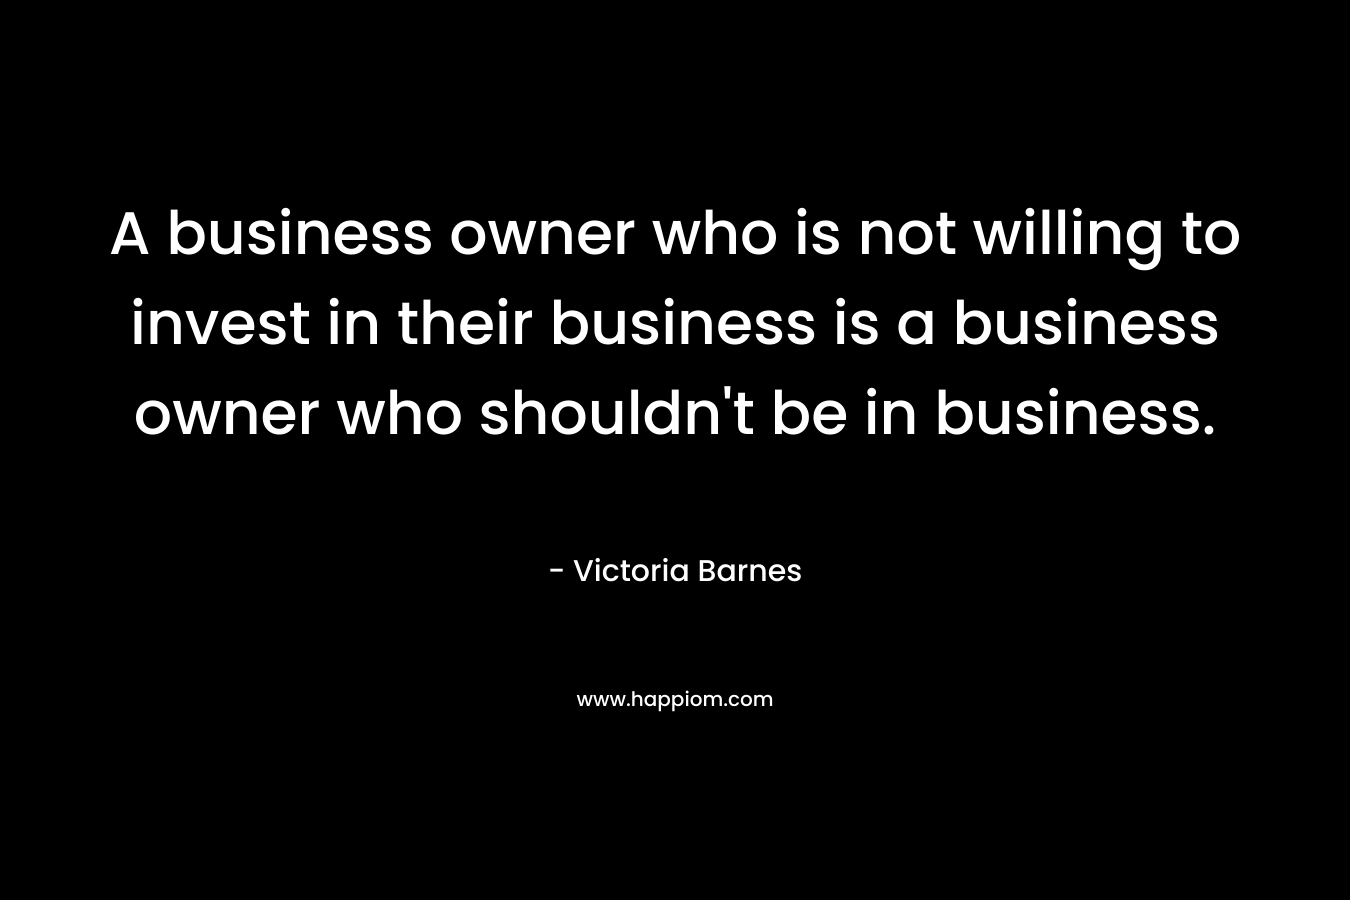 A business owner who is not willing to invest in their business is a business owner who shouldn't be in business.